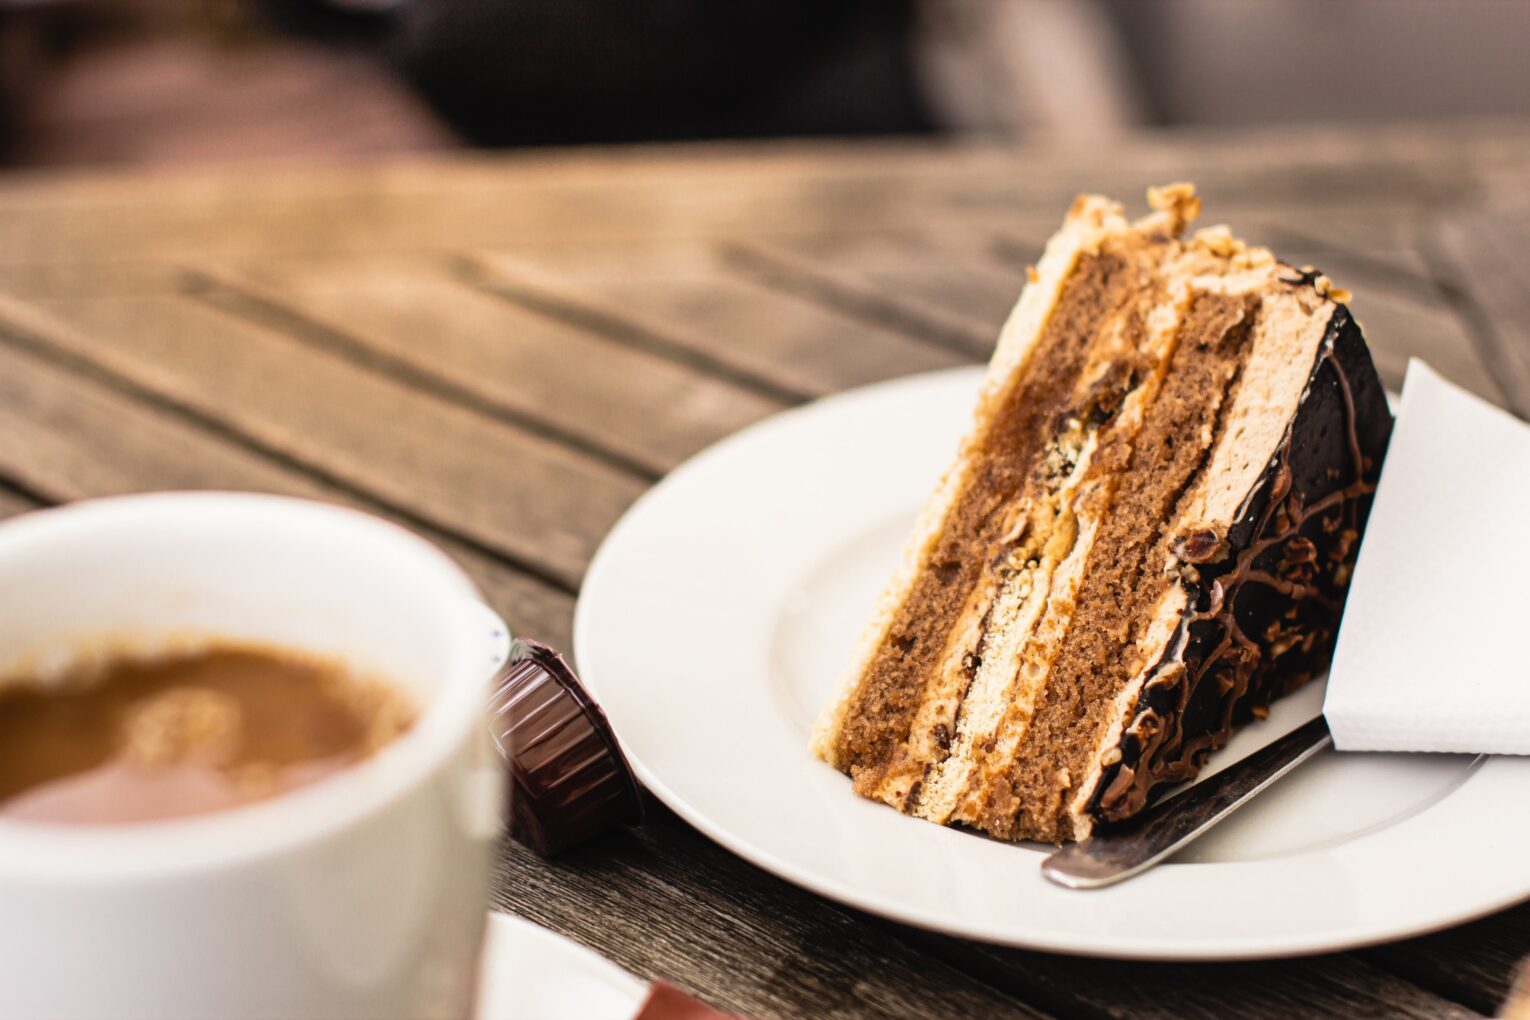 A slice of cake with a cup of coffee